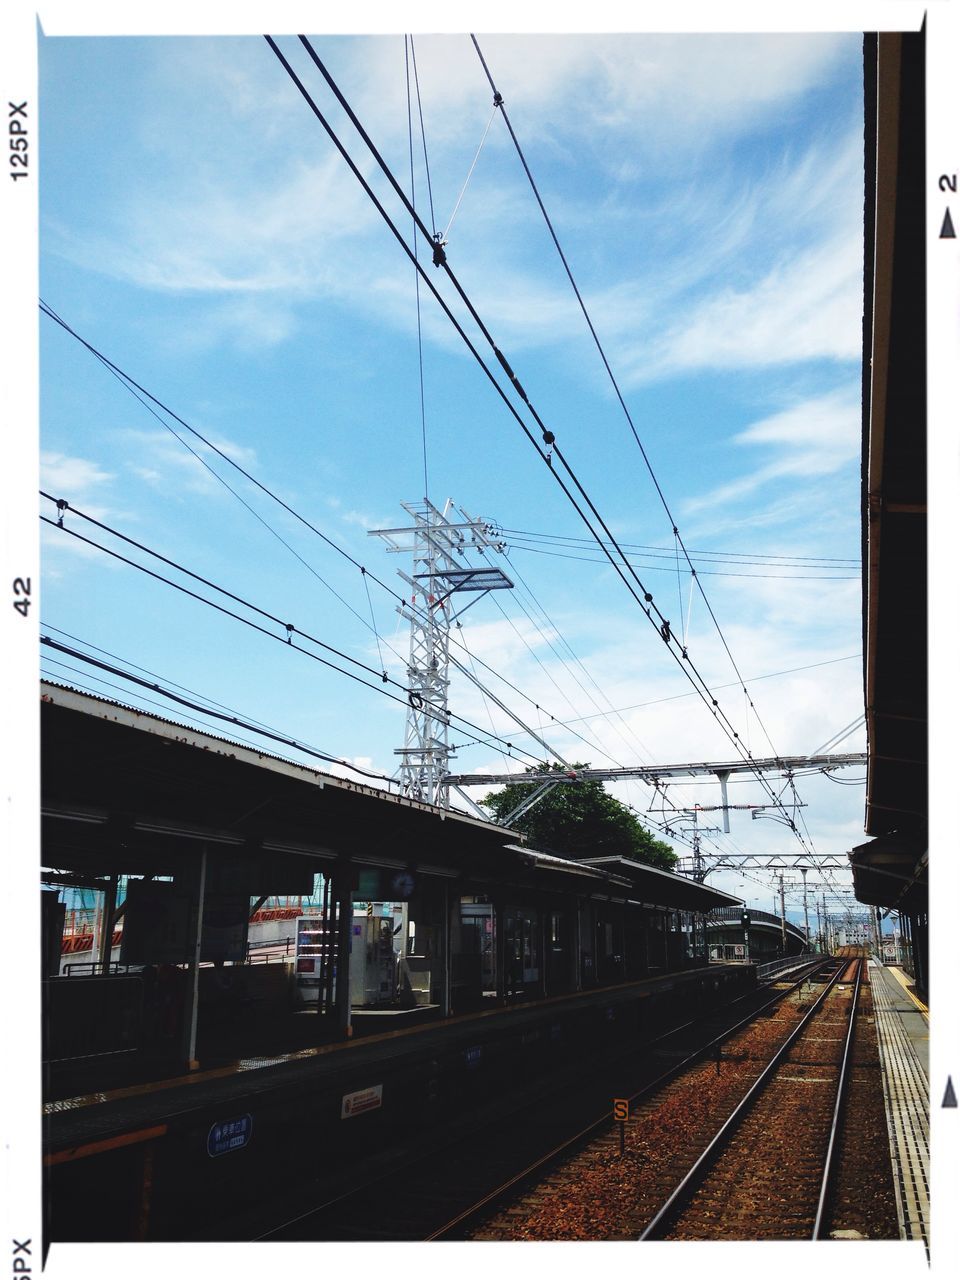 railroad track, transportation, rail transportation, sky, power line, public transportation, railroad station platform, railroad station, built structure, architecture, electricity pylon, connection, train - vehicle, transfer print, cable, building exterior, power supply, cloud - sky, mode of transport, electricity